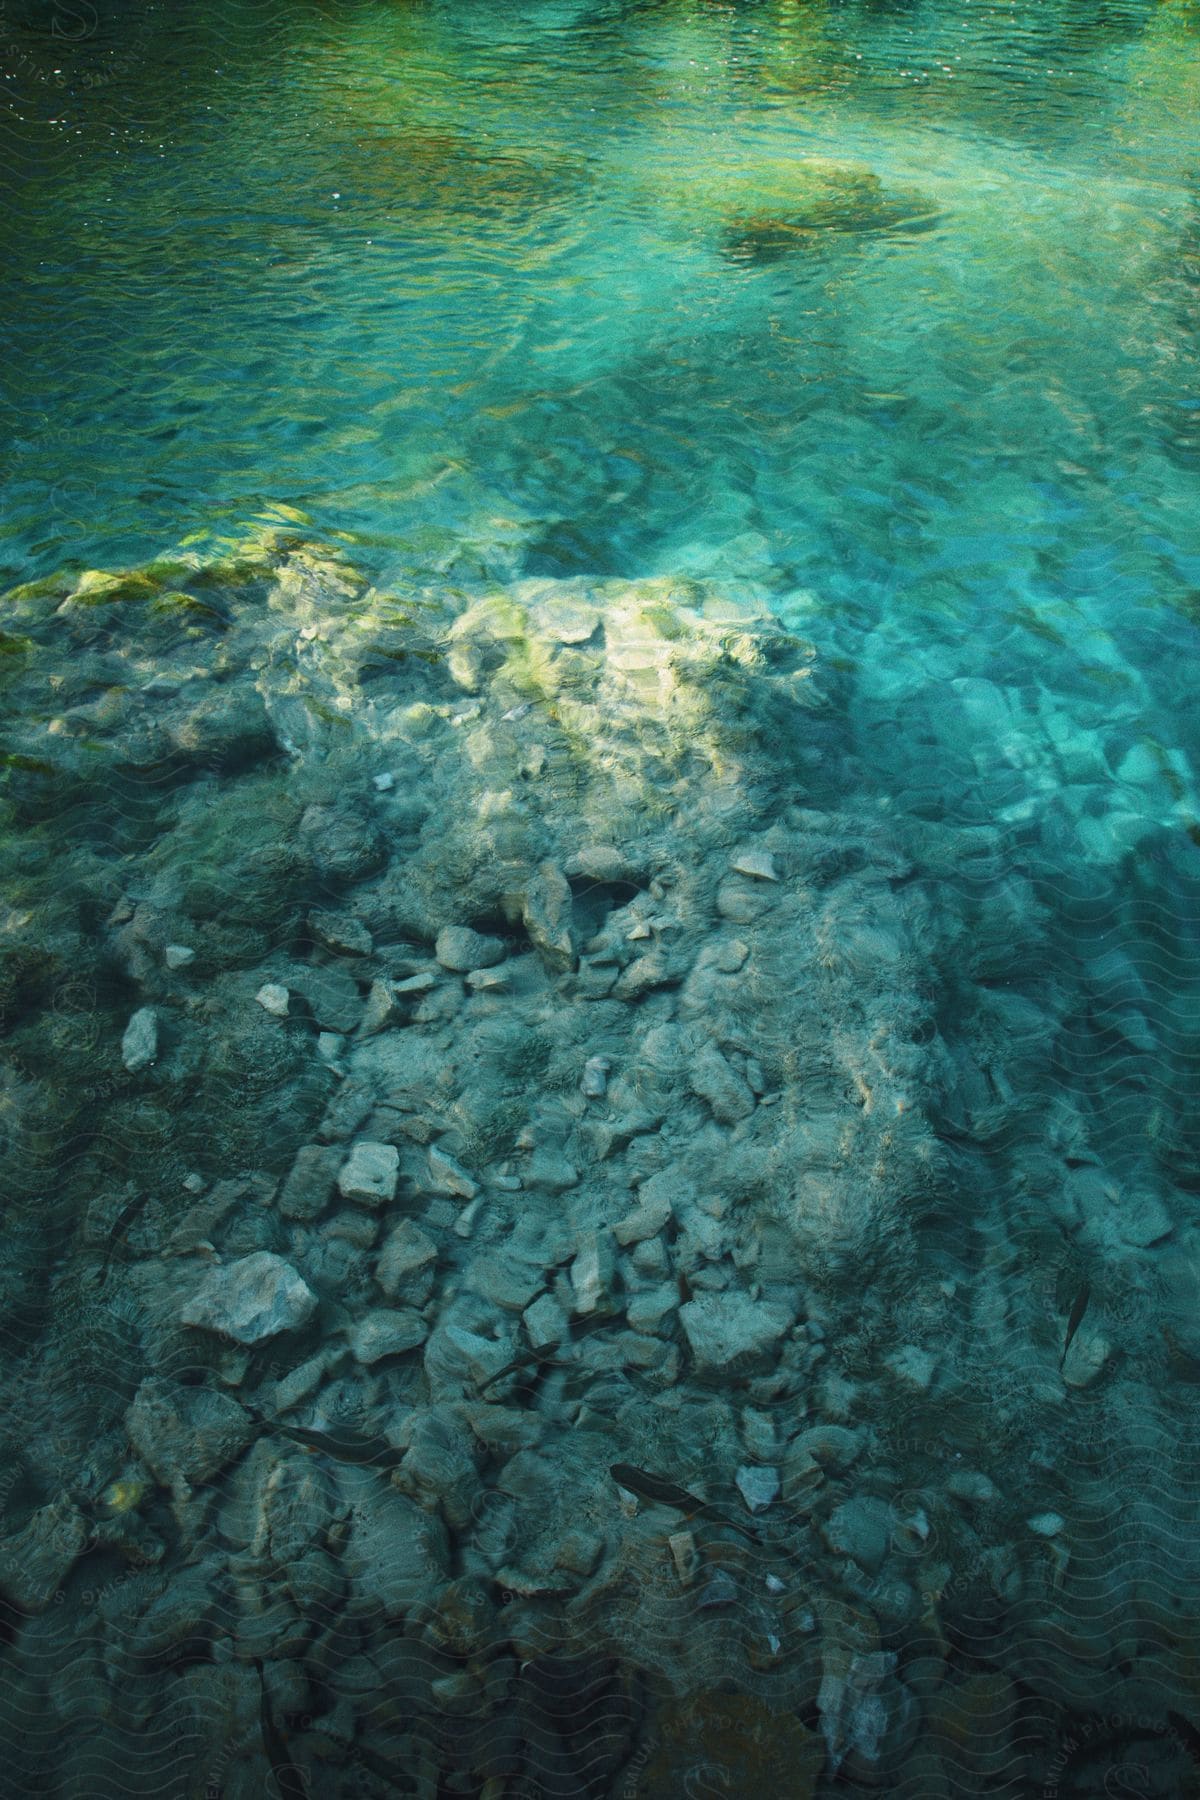 Shallow clear water near the coast